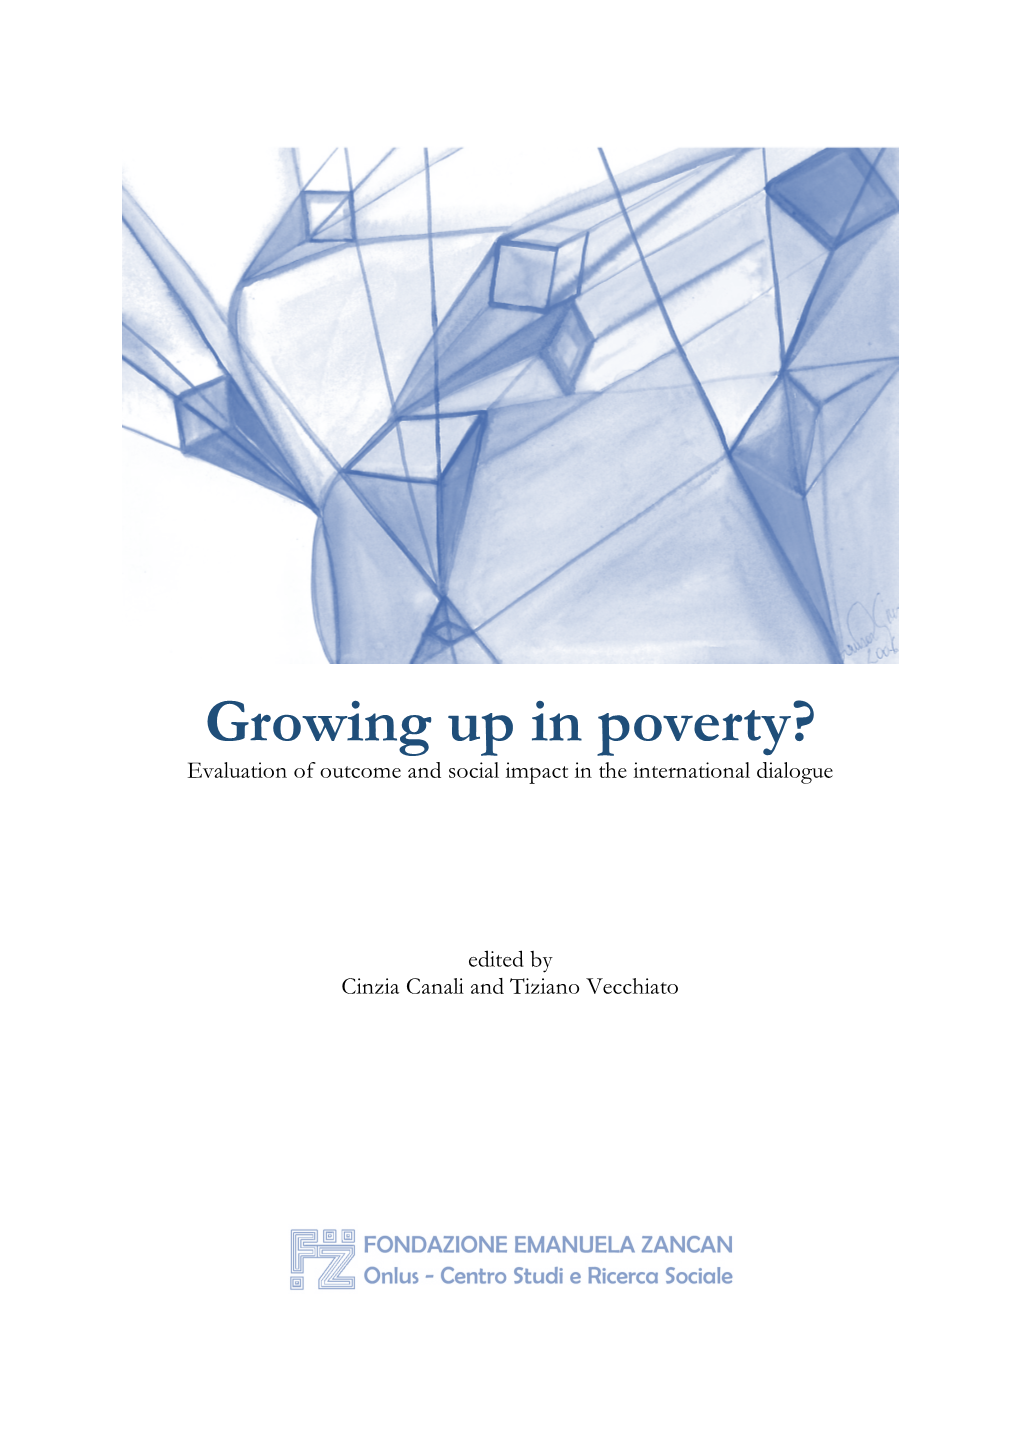 Growing up in Poverty? Evaluation of Outcome and Social Impact in the International Dialogue